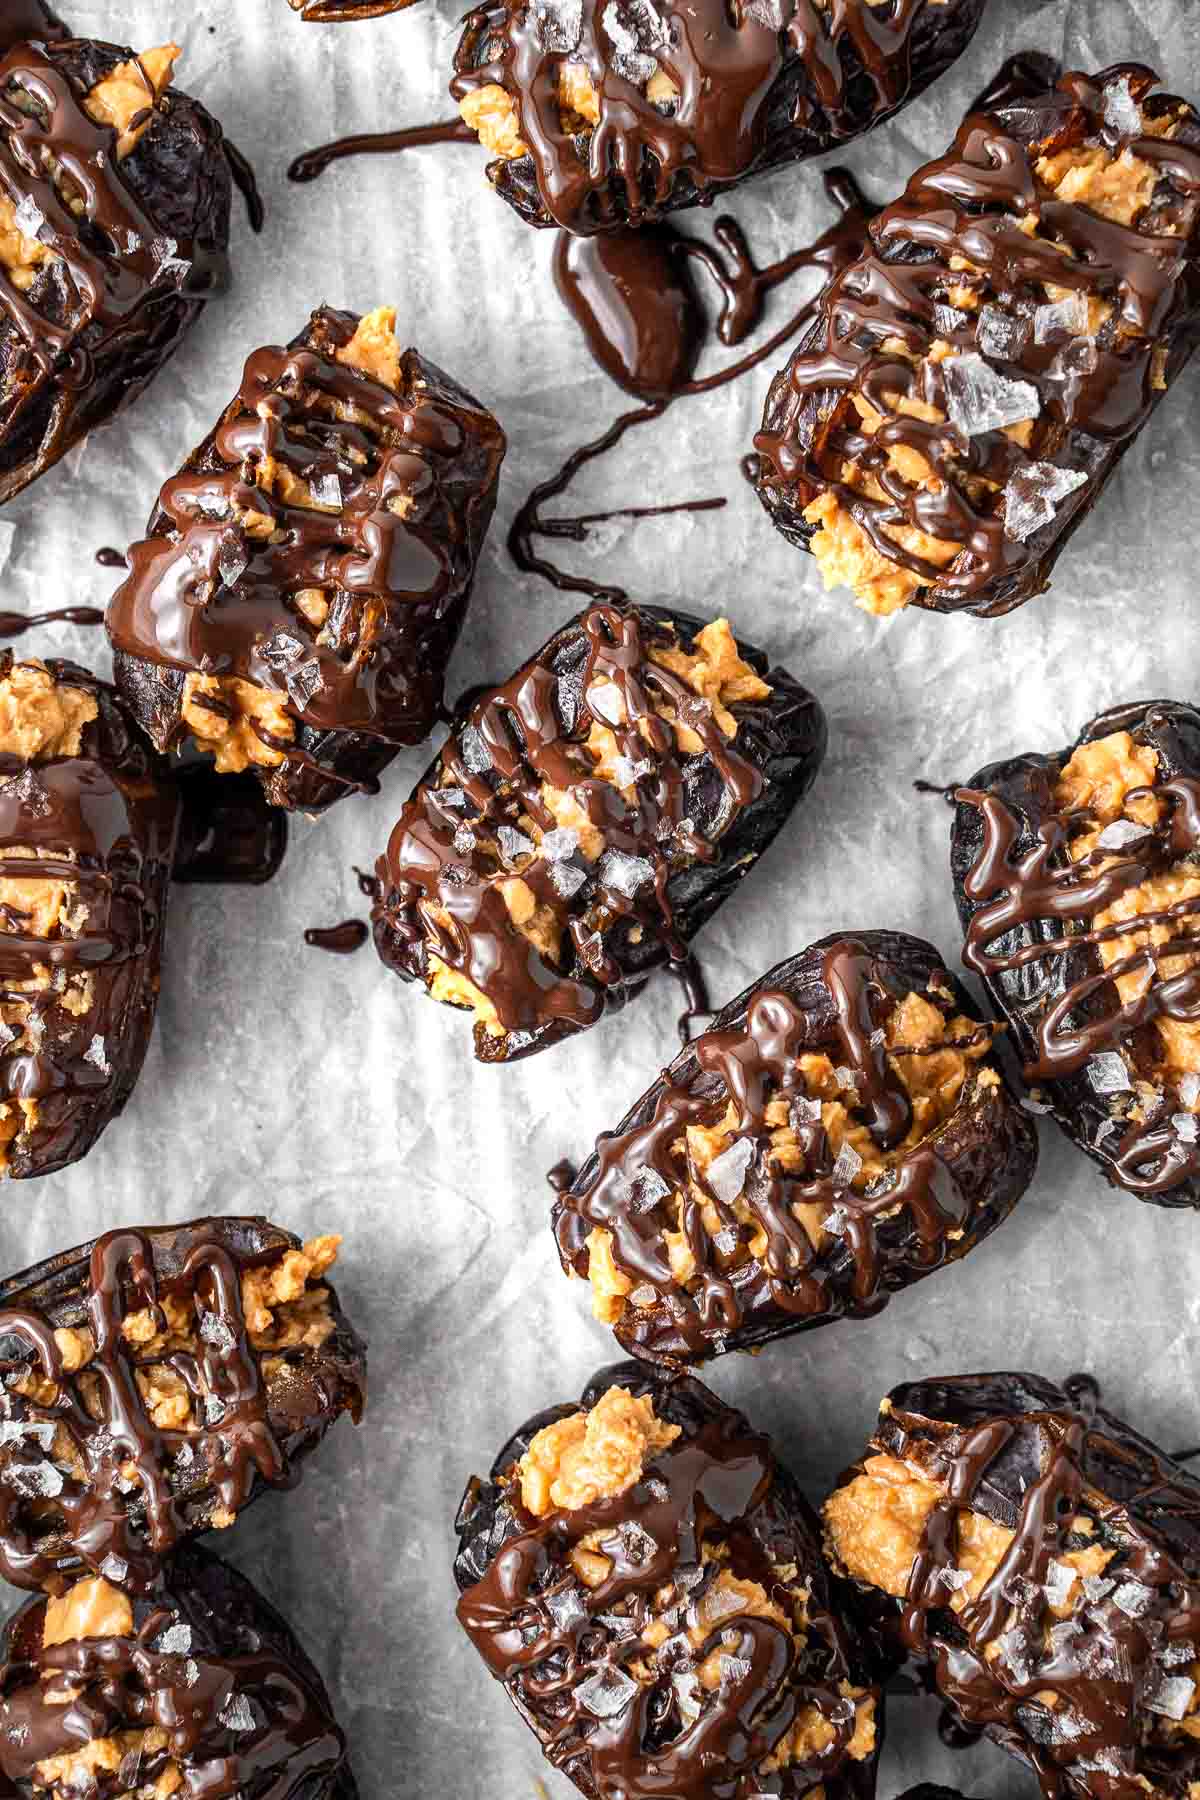 Peanut butter dates drizzled with dark chocolate and topped with sea salt.